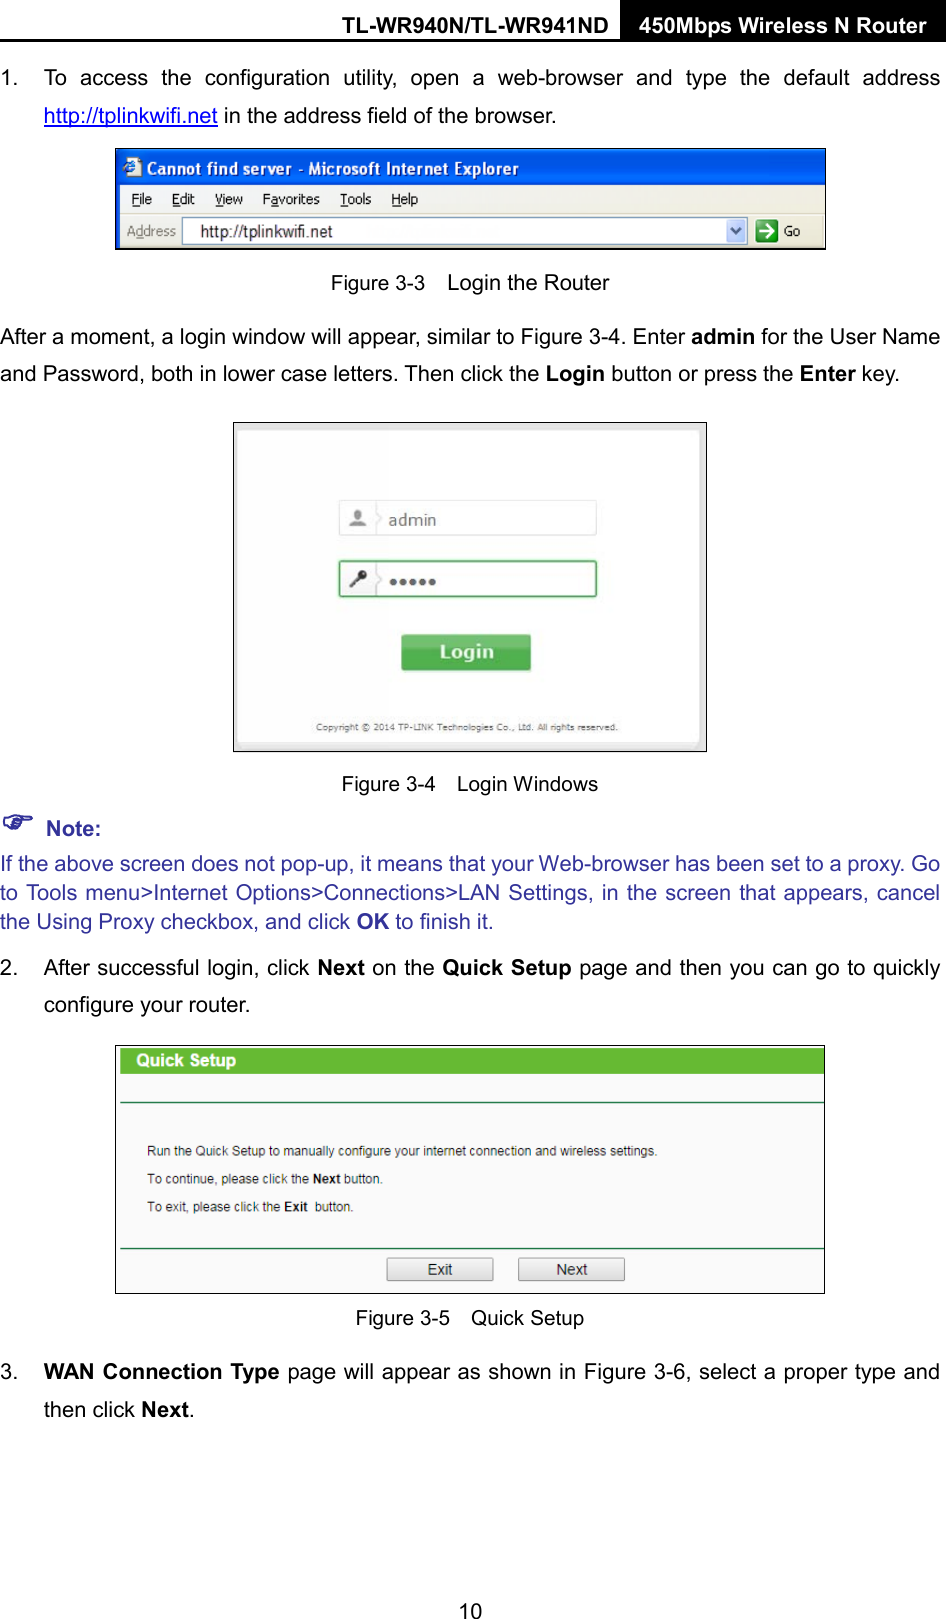 TL-WR940N/TL-WR941ND 450Mbps Wireless N Router  1. To access the configuration utility, open a web-browser and type the default address http://tplinkwifi.net in the address field of the browser.  Figure 3-3  Login the Router After a moment, a login window will appear, similar to Figure 3-4. Enter admin for the User Name and Password, both in lower case letters. Then click the Login button or press the Enter key.  Figure 3-4  Login Windows  Note: If the above screen does not pop-up, it means that your Web-browser has been set to a proxy. Go to Tools menu&gt;Internet Options&gt;Connections&gt;LAN Settings, in the screen that appears, cancel the Using Proxy checkbox, and click OK to finish it. 2. After successful login, click Next on the Quick Setup page and then you can go to quickly configure your router.    Figure 3-5  Quick Setup 3. WAN Connection Type page will appear as shown in Figure 3-6, select a proper type and then click Next. 10 